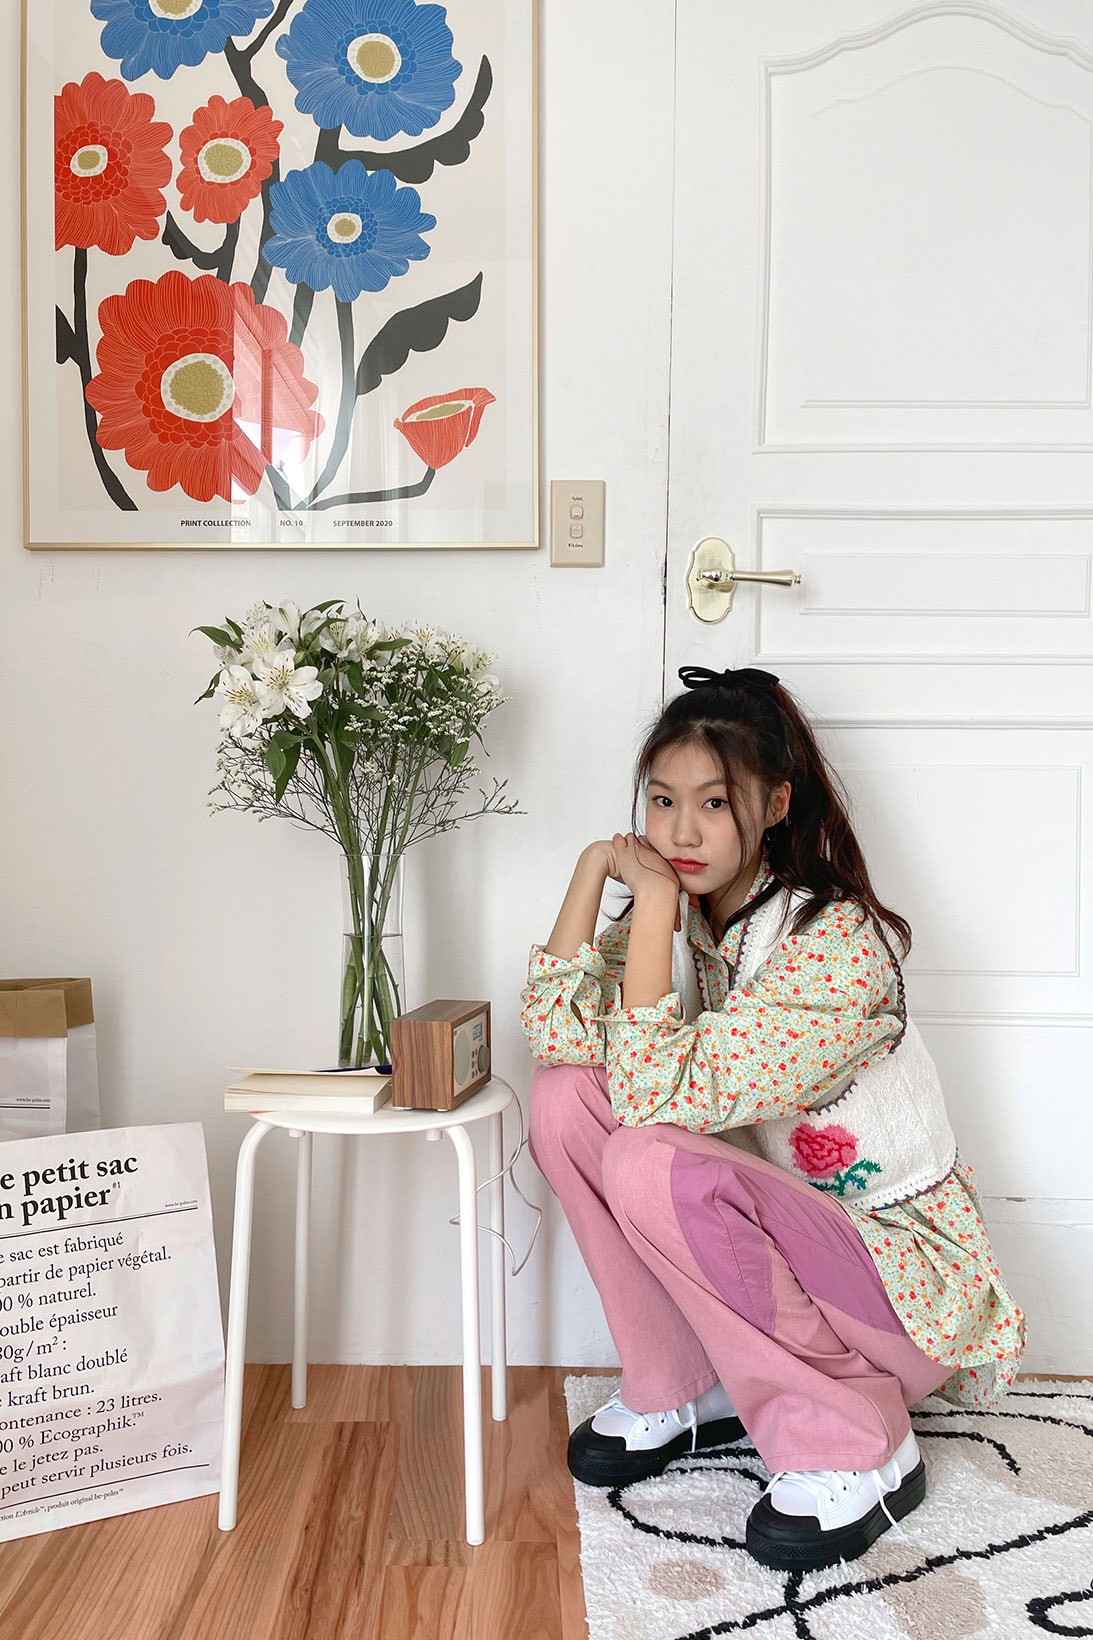 jung hayoung korean model upcycling sustainable fashion pink pants jeans knitwear crochet